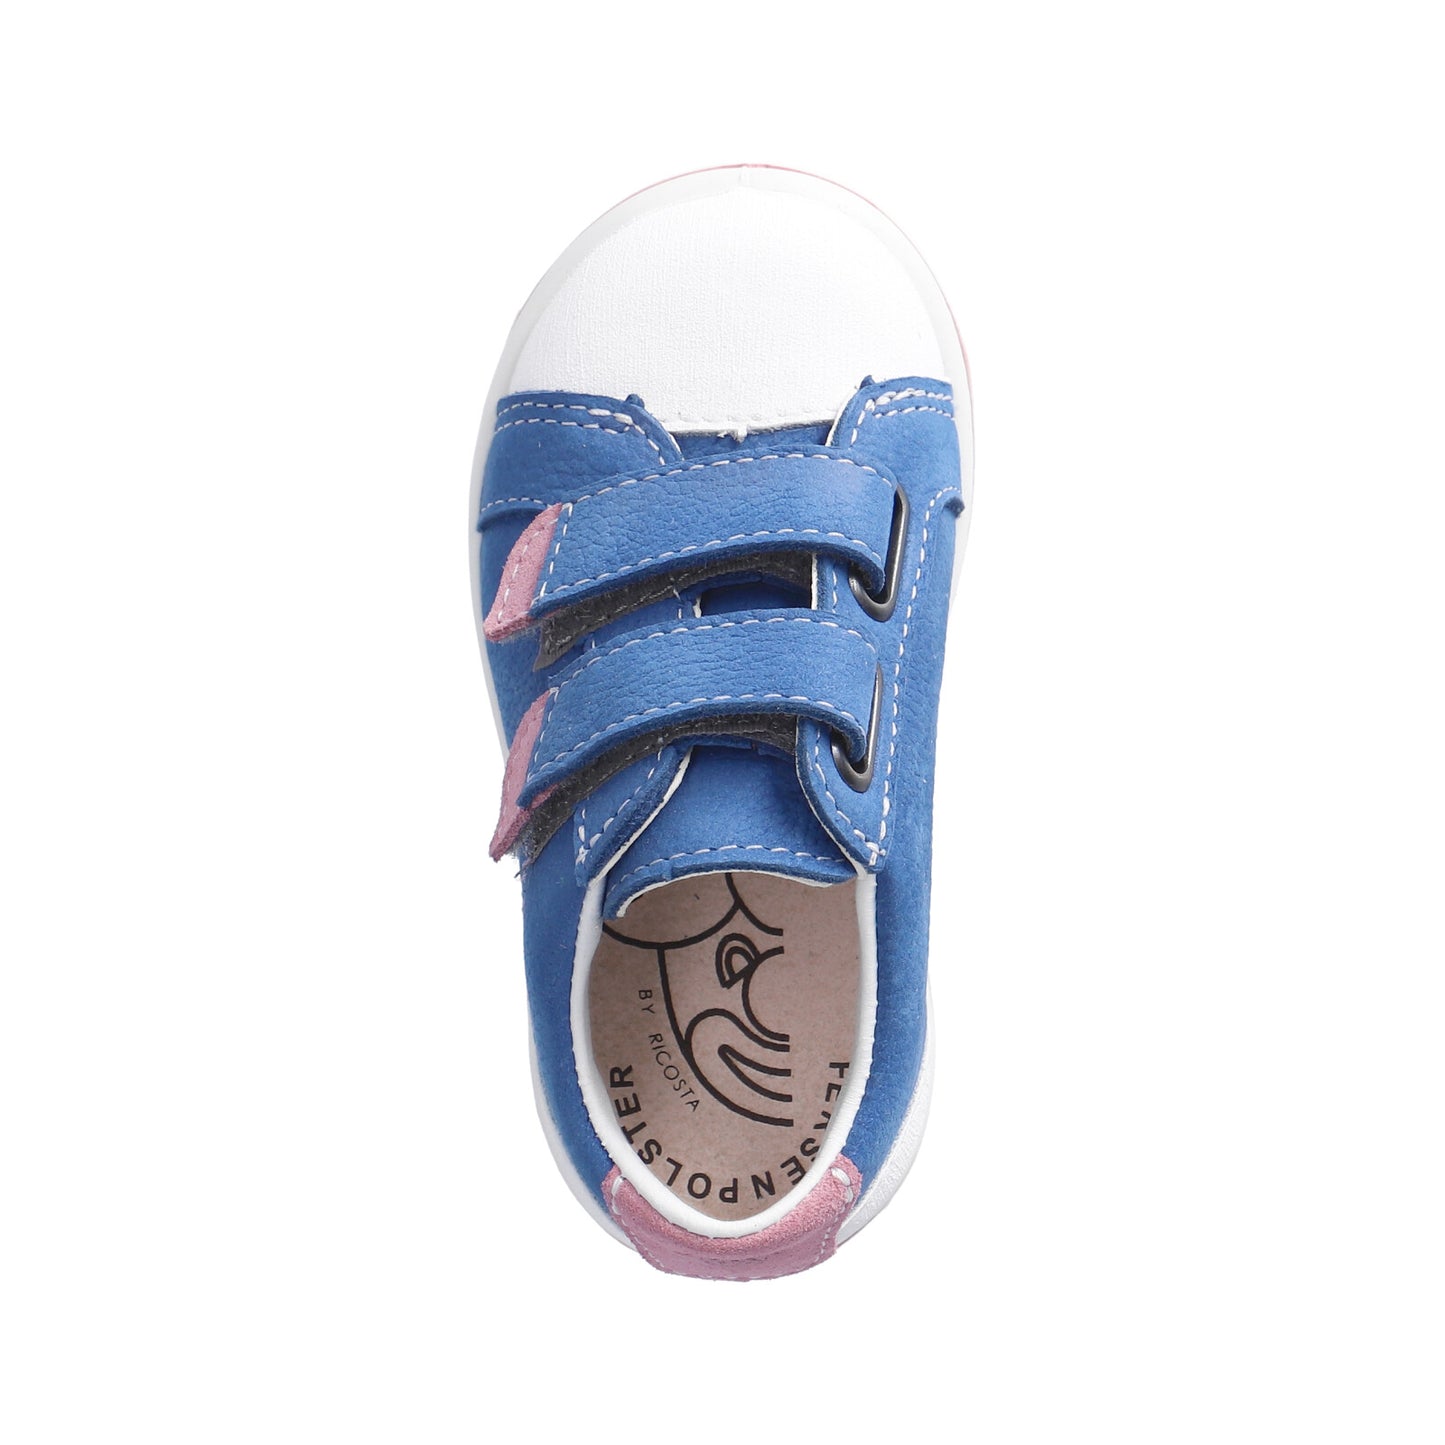 Nippy Leather Sneaker Shoe in Blue and Pink